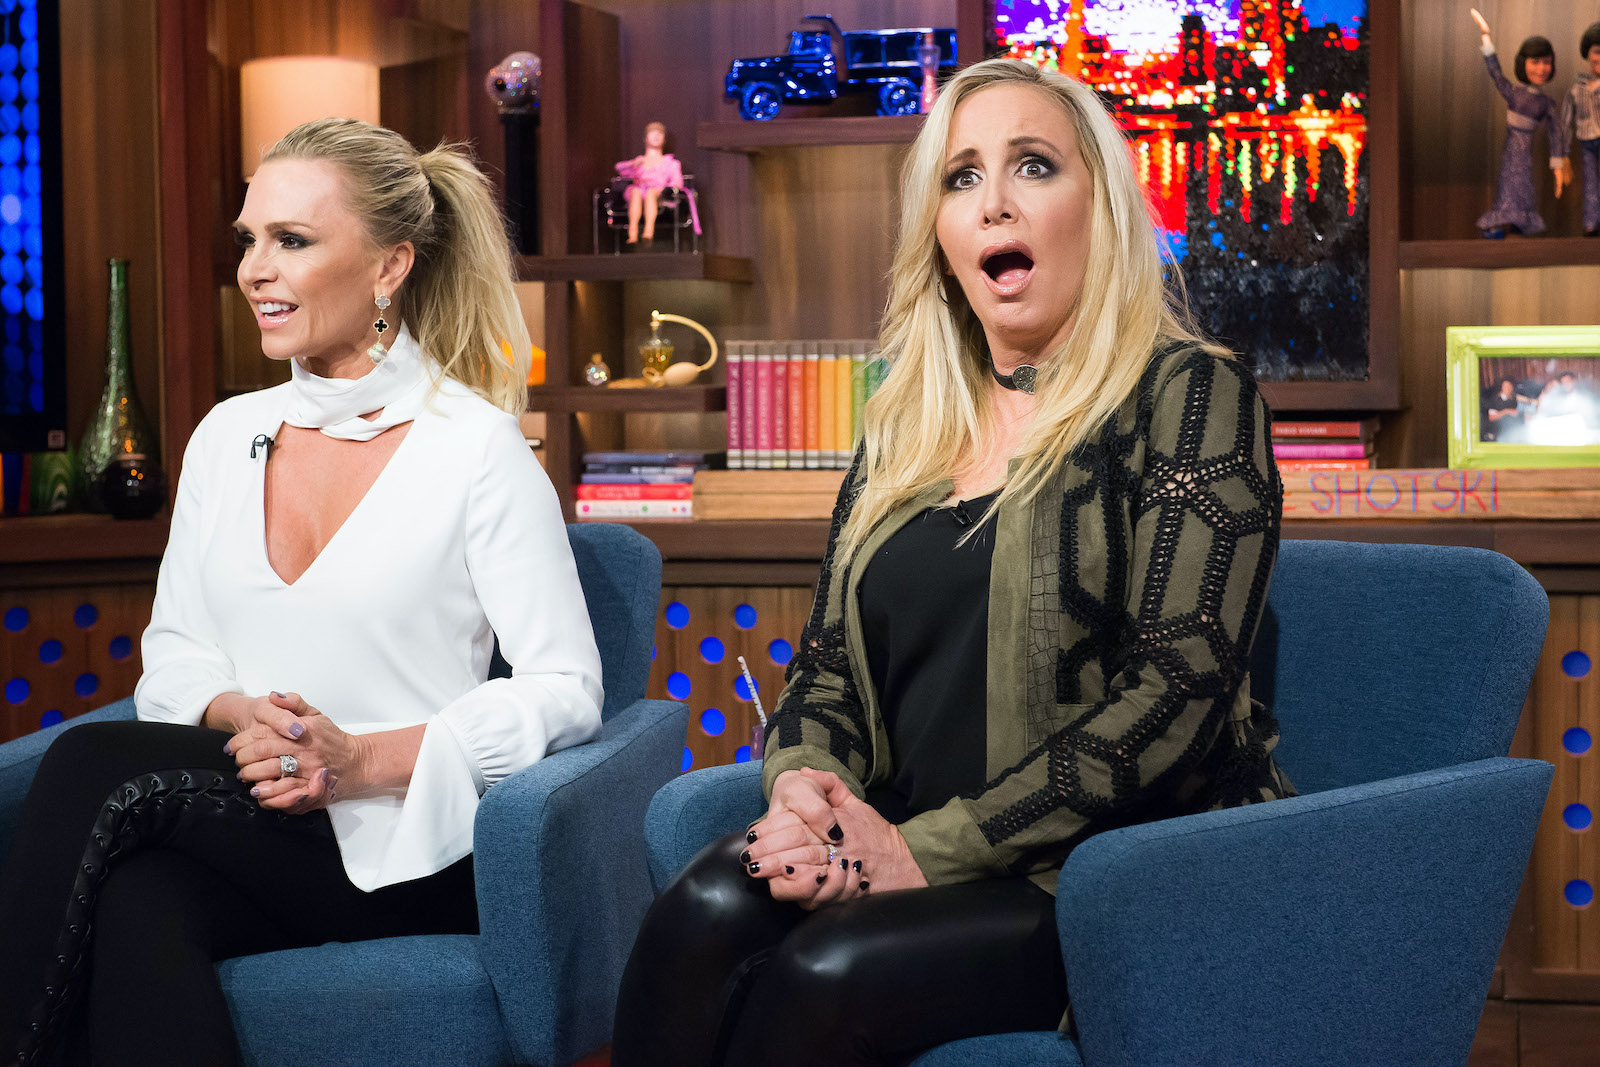 Tamra Judge and Shannon Beador from 'RHOC' answer questions on 'WWHL'